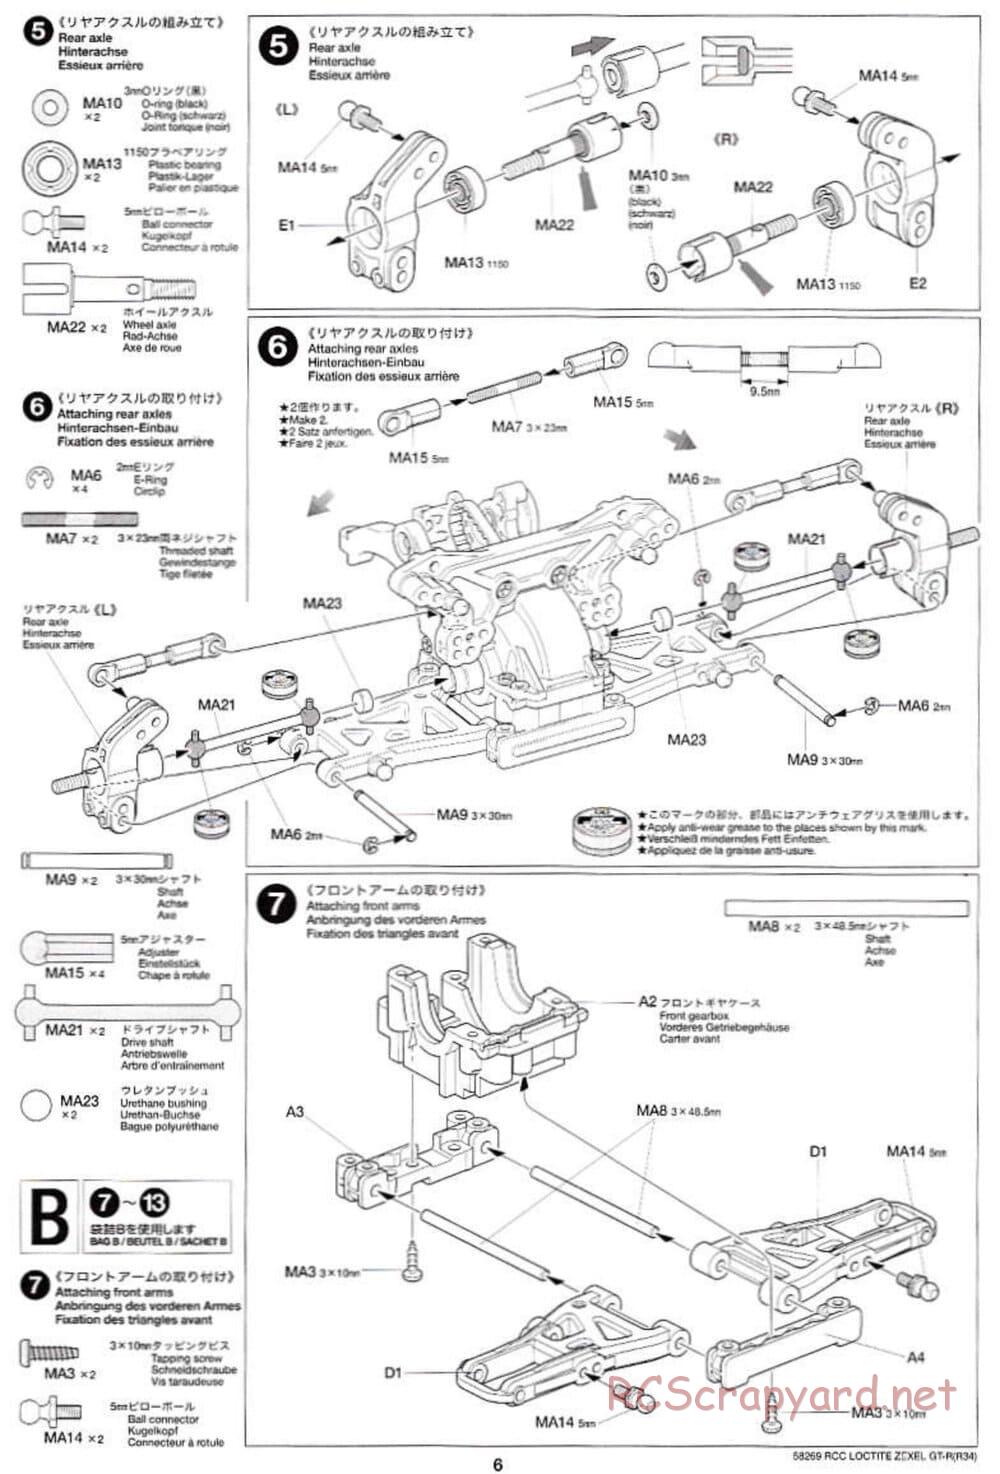 Tamiya - Loctite Zexel Skyline GT-R (R34) - TA-04 Chassis - Manual - Page 6